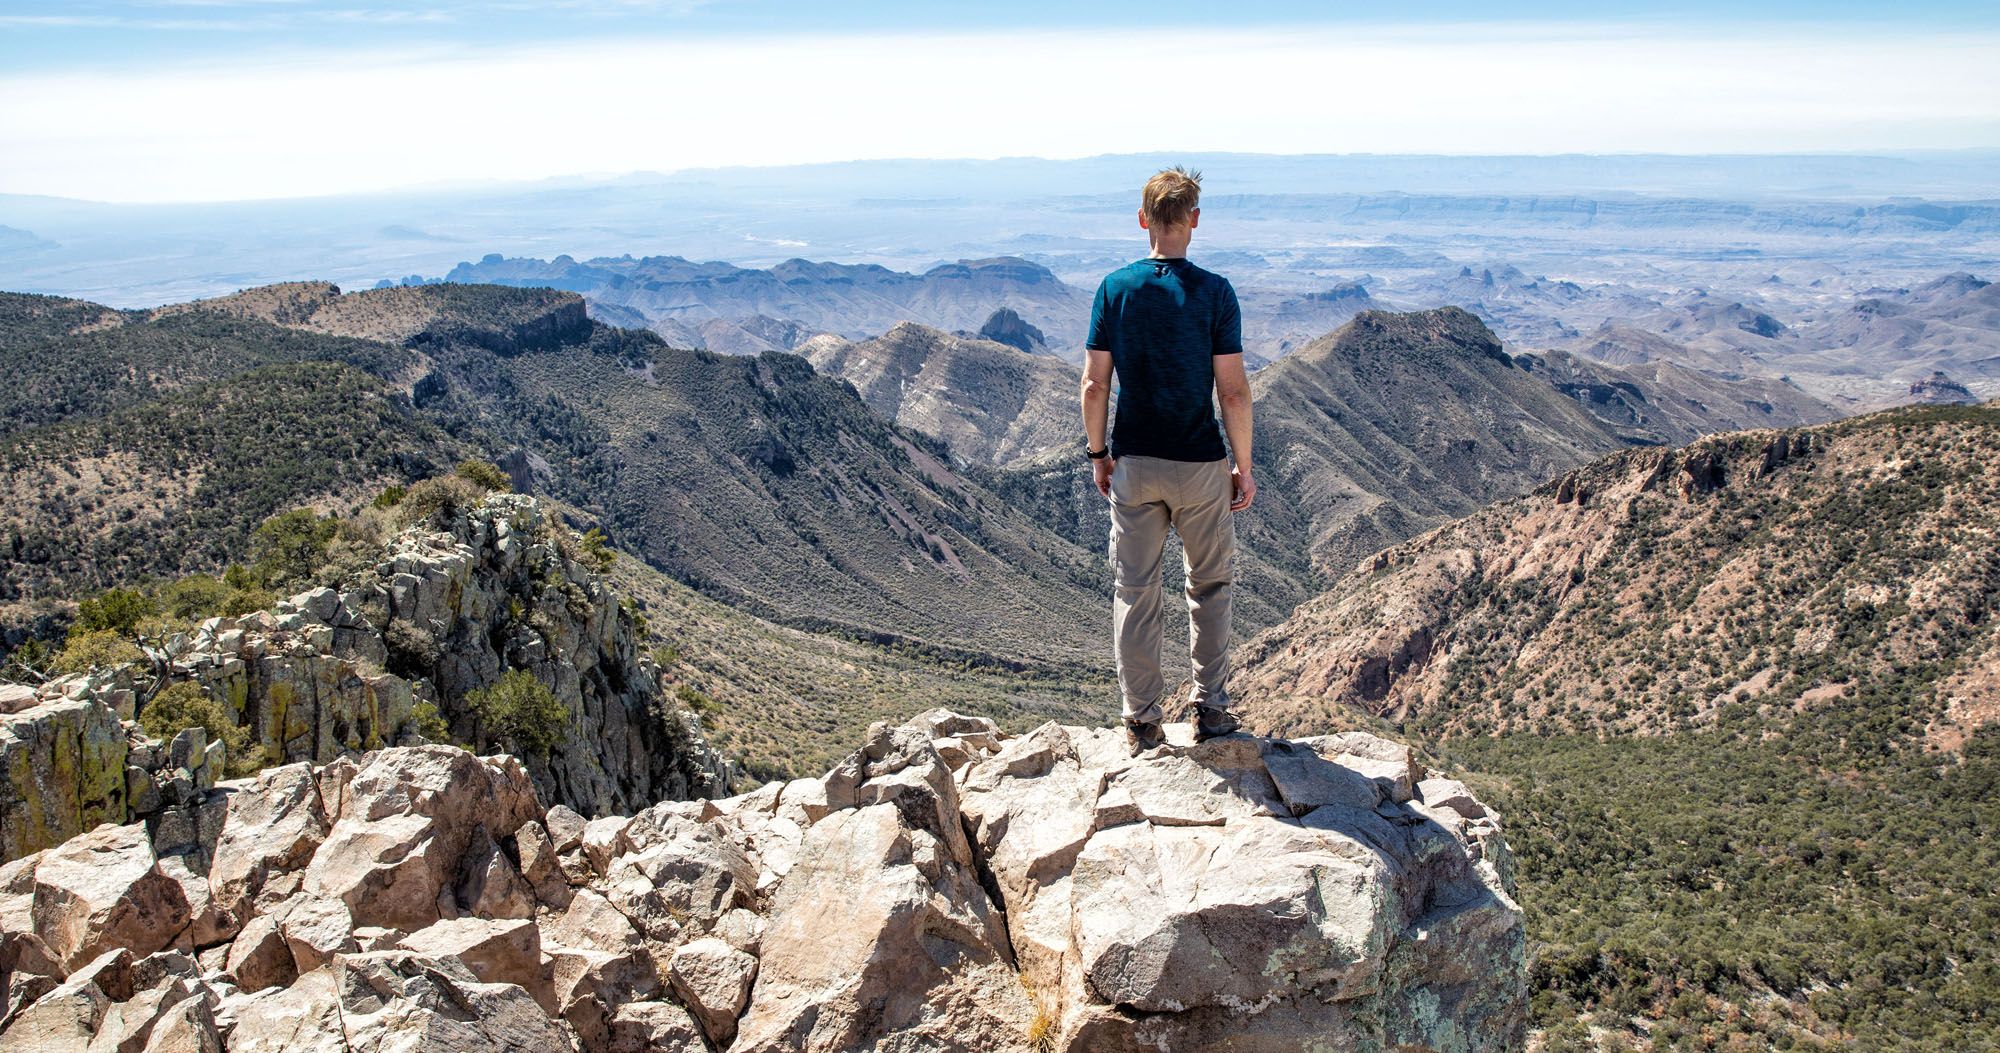 Featured image for “Hiking to Emory Peak in Big Bend National Park”